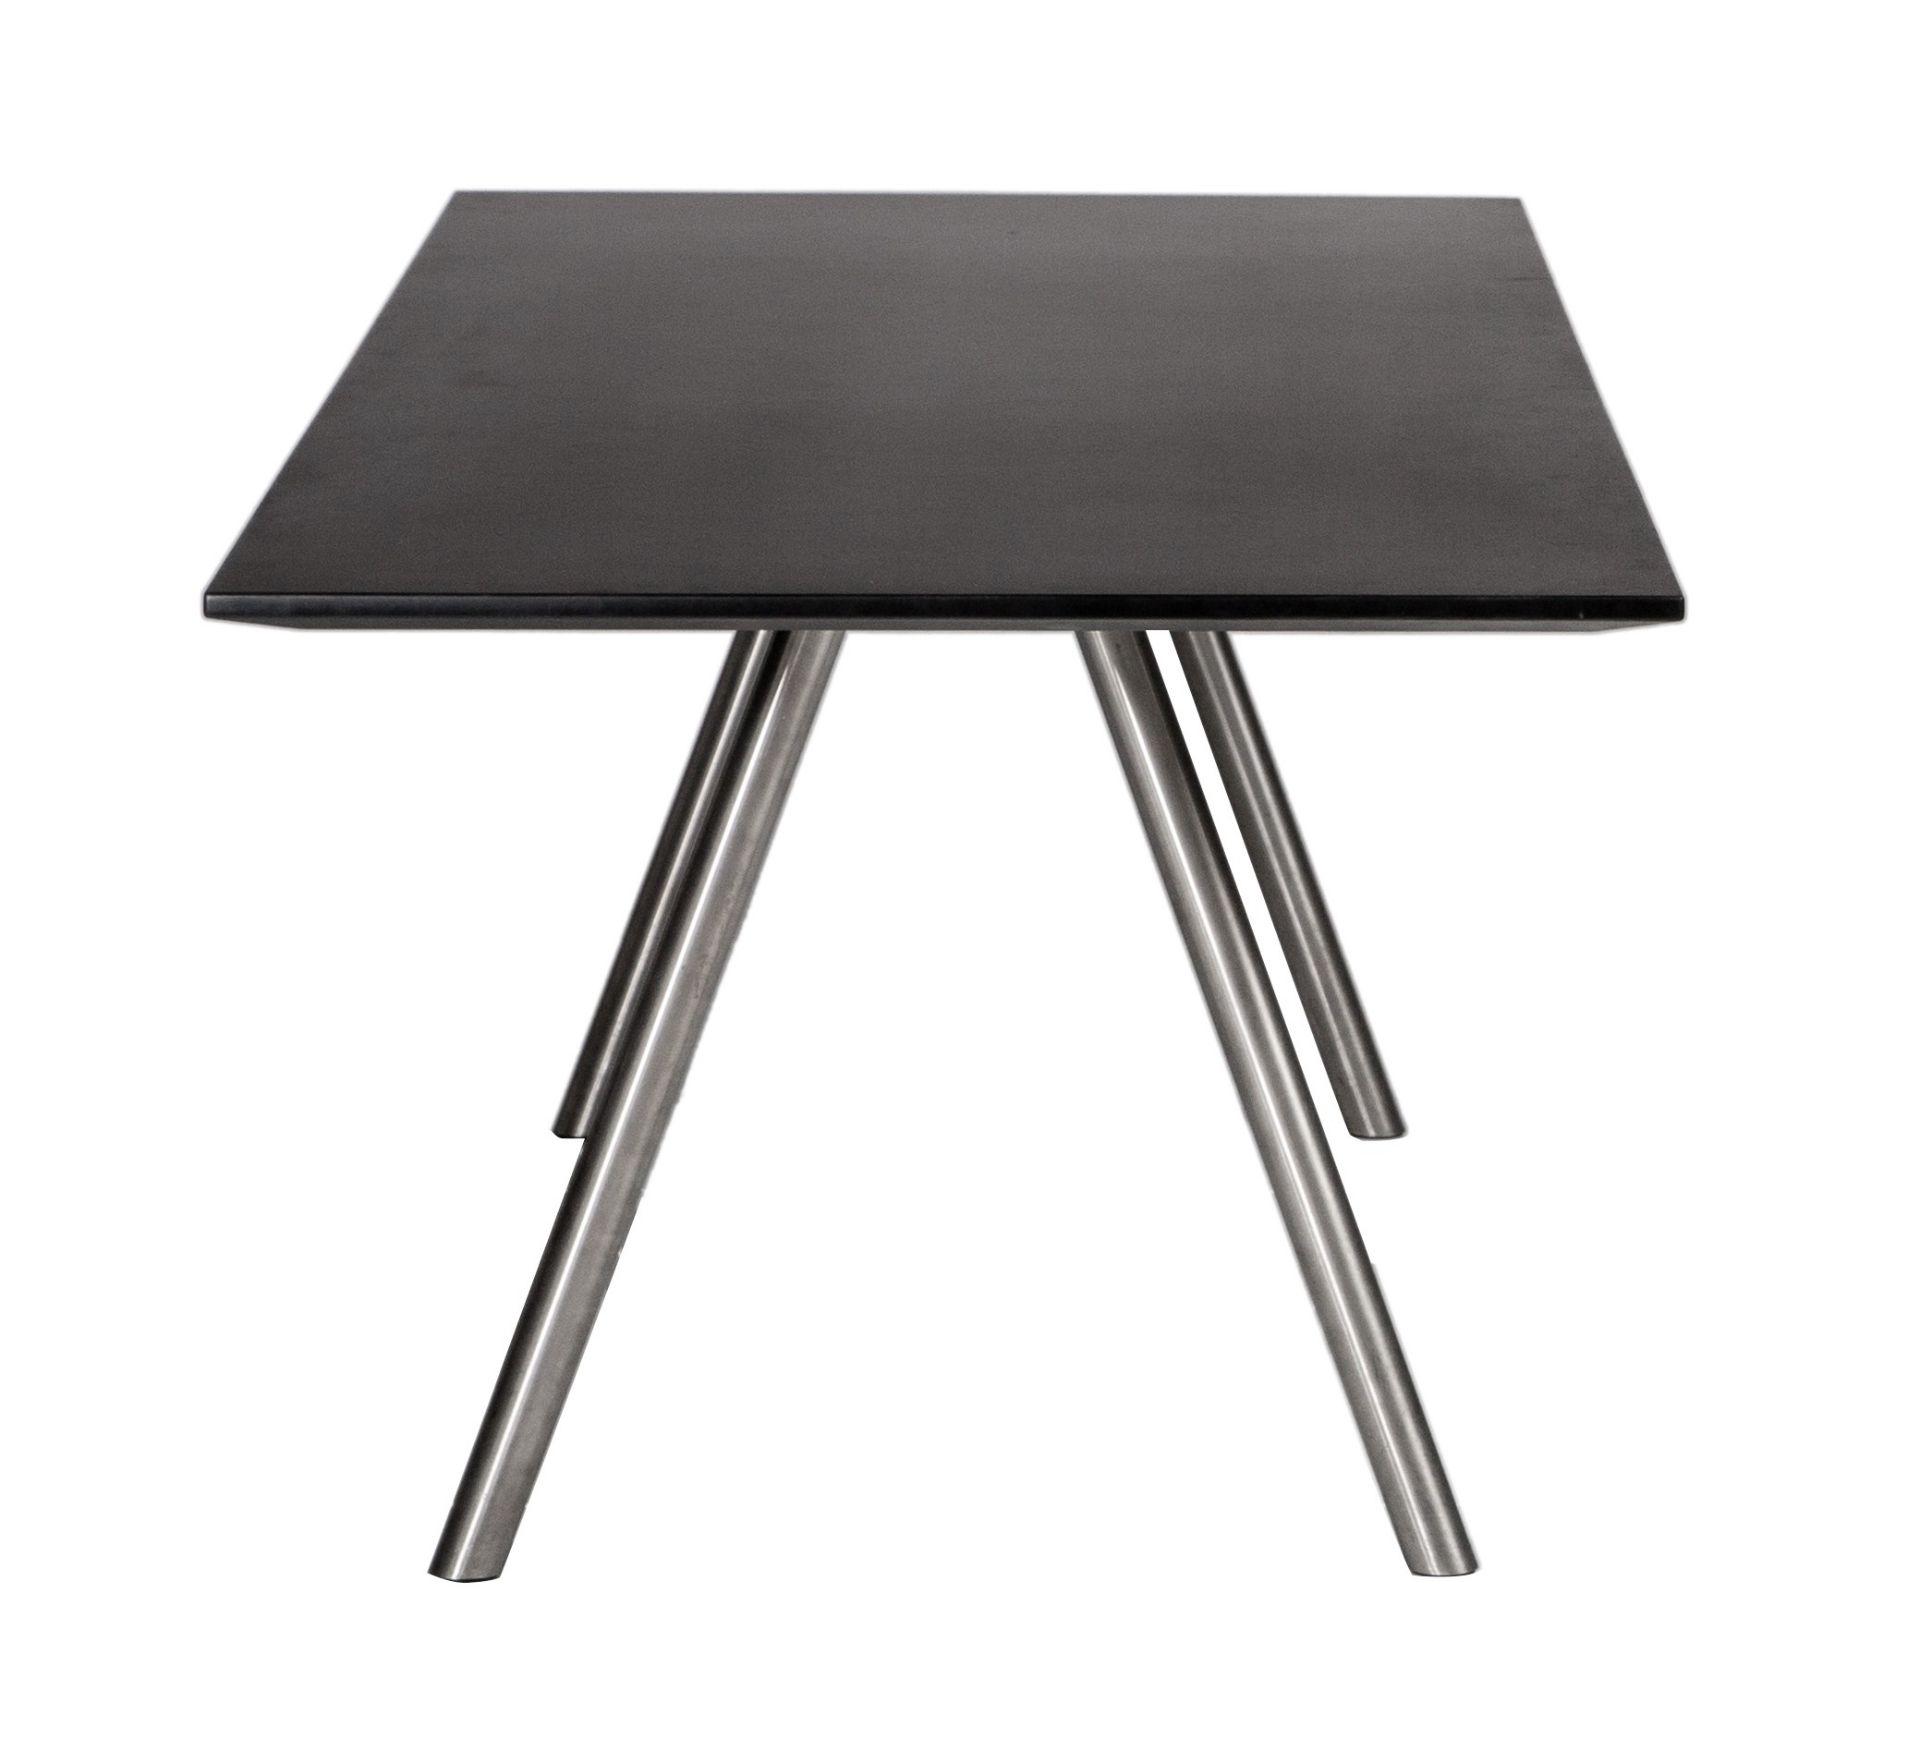 An A-Table by Maarten van Severen for Vitra, H 72,5 - W 240 - D 90 cm - Image 18 of 22